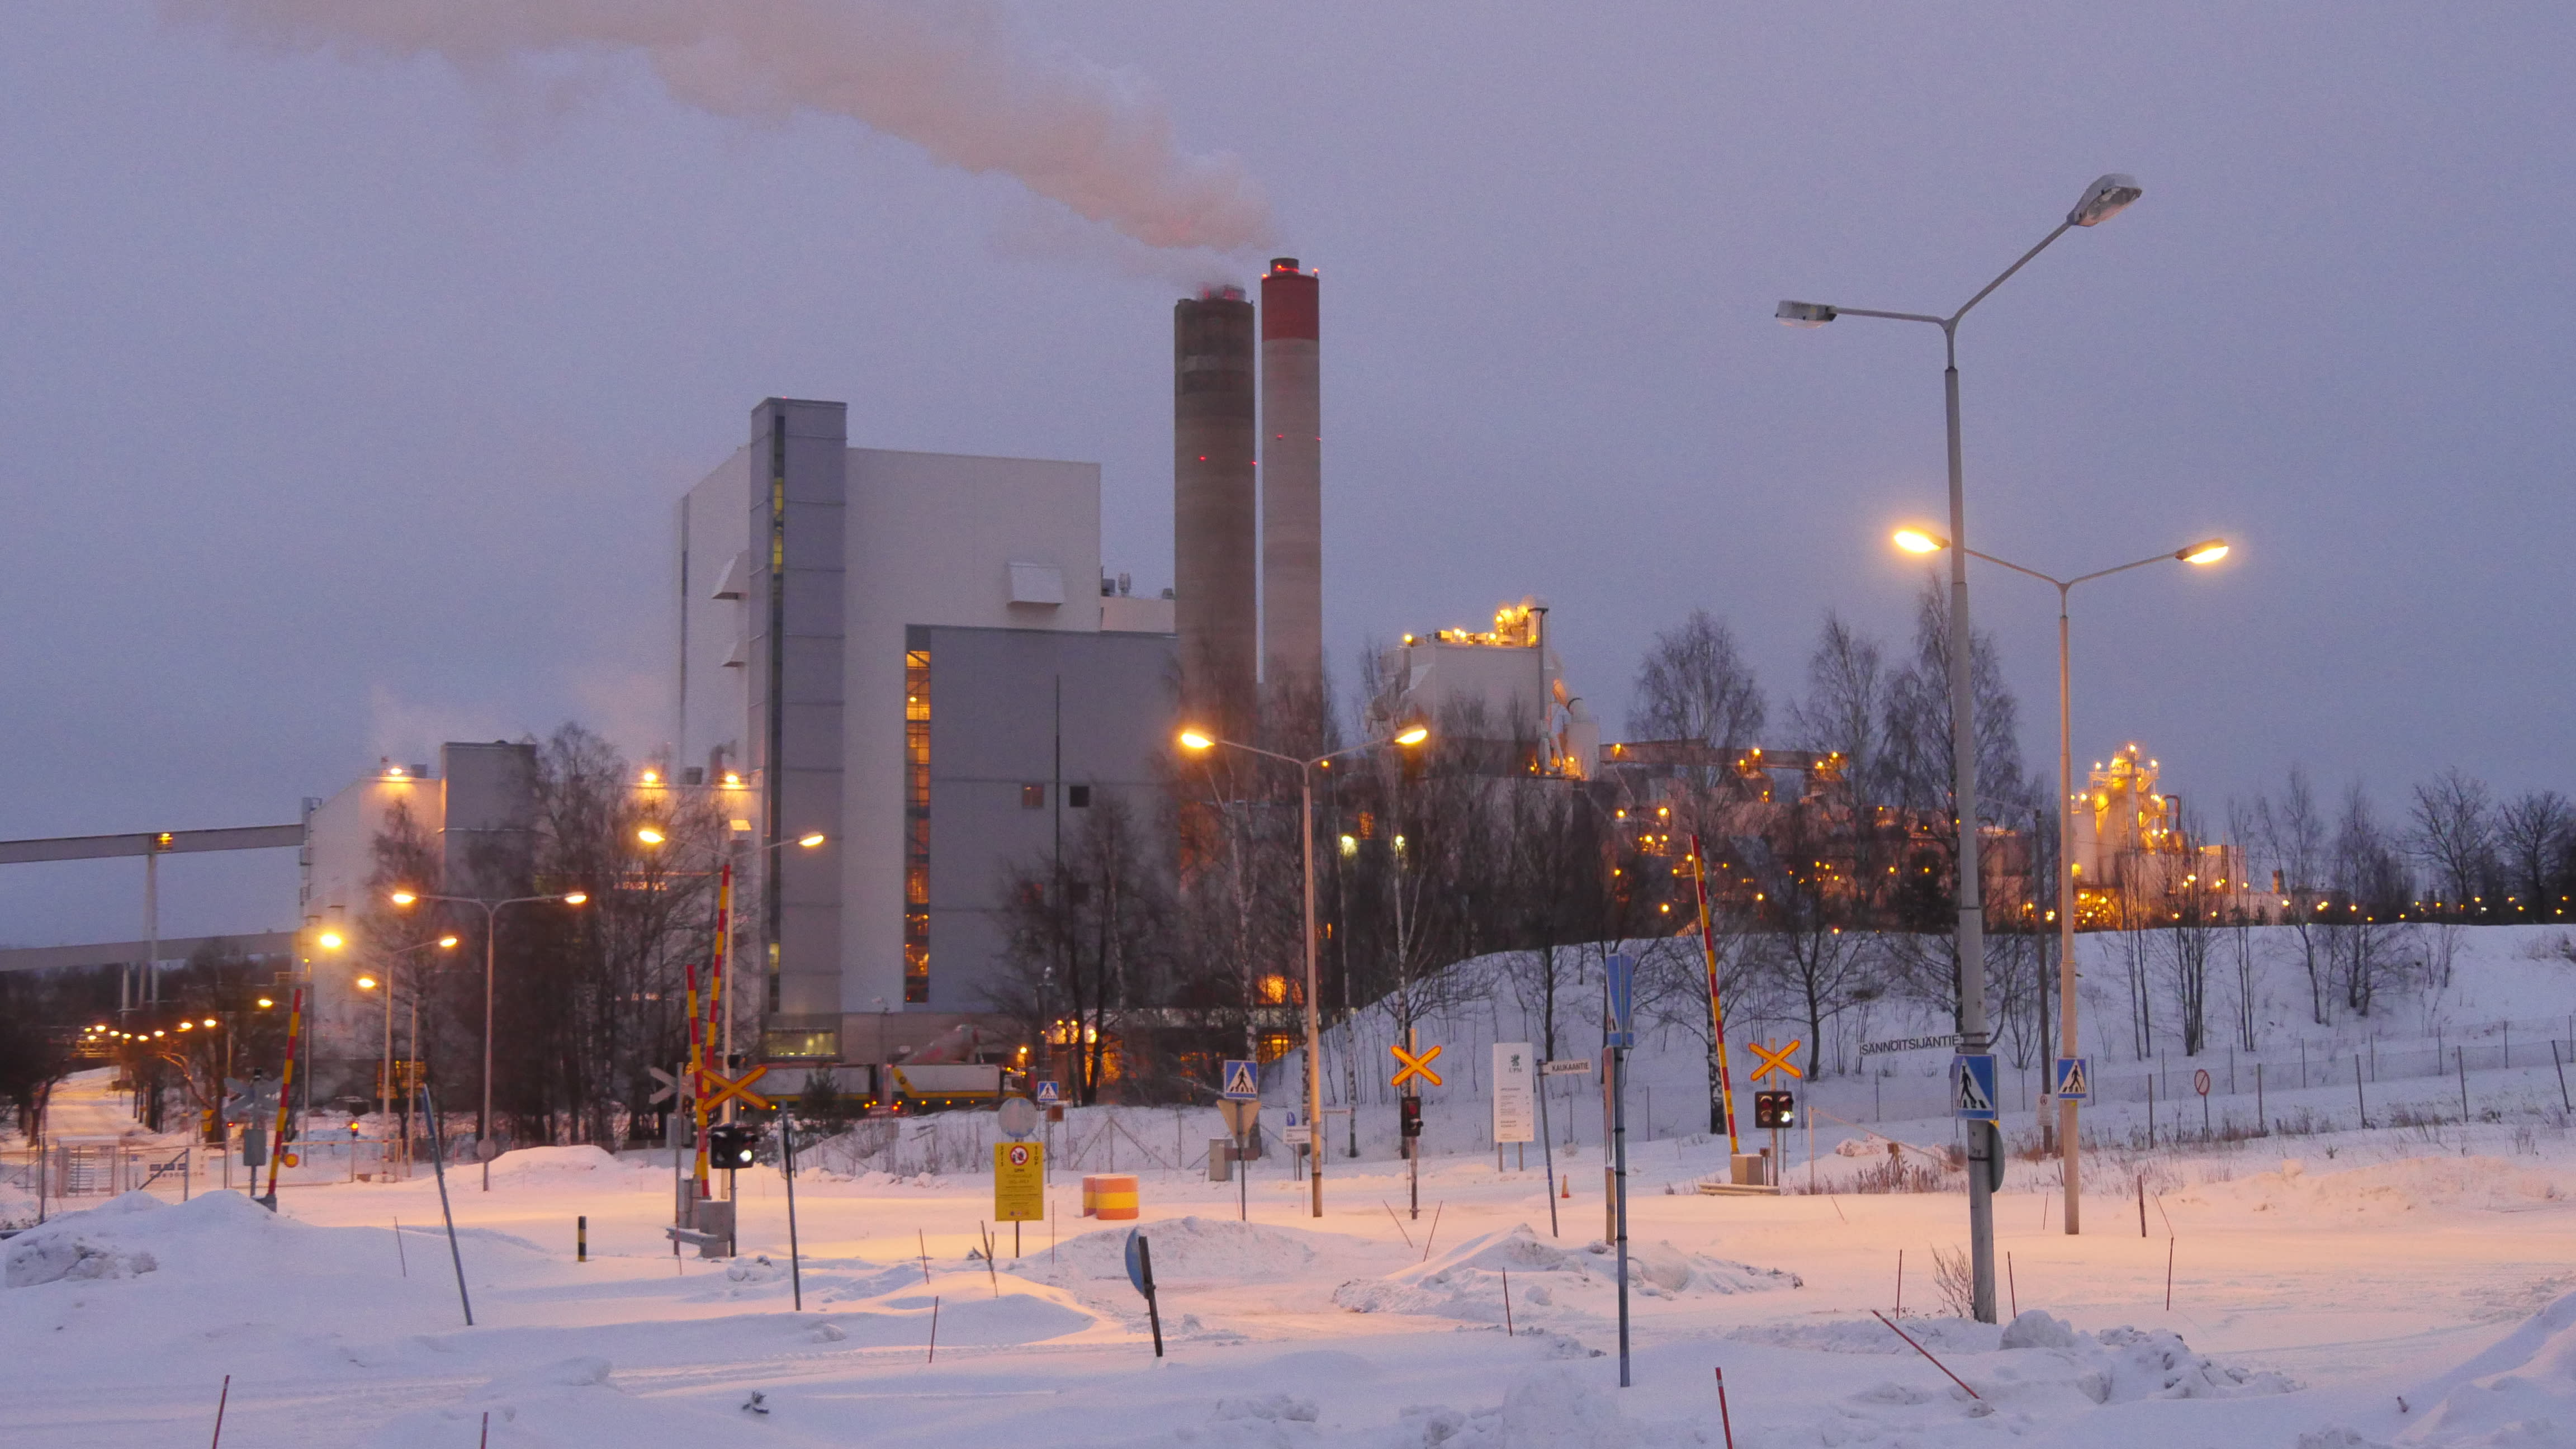 More pressure on UPM: Finnish Transport Association supports striking paperworkers